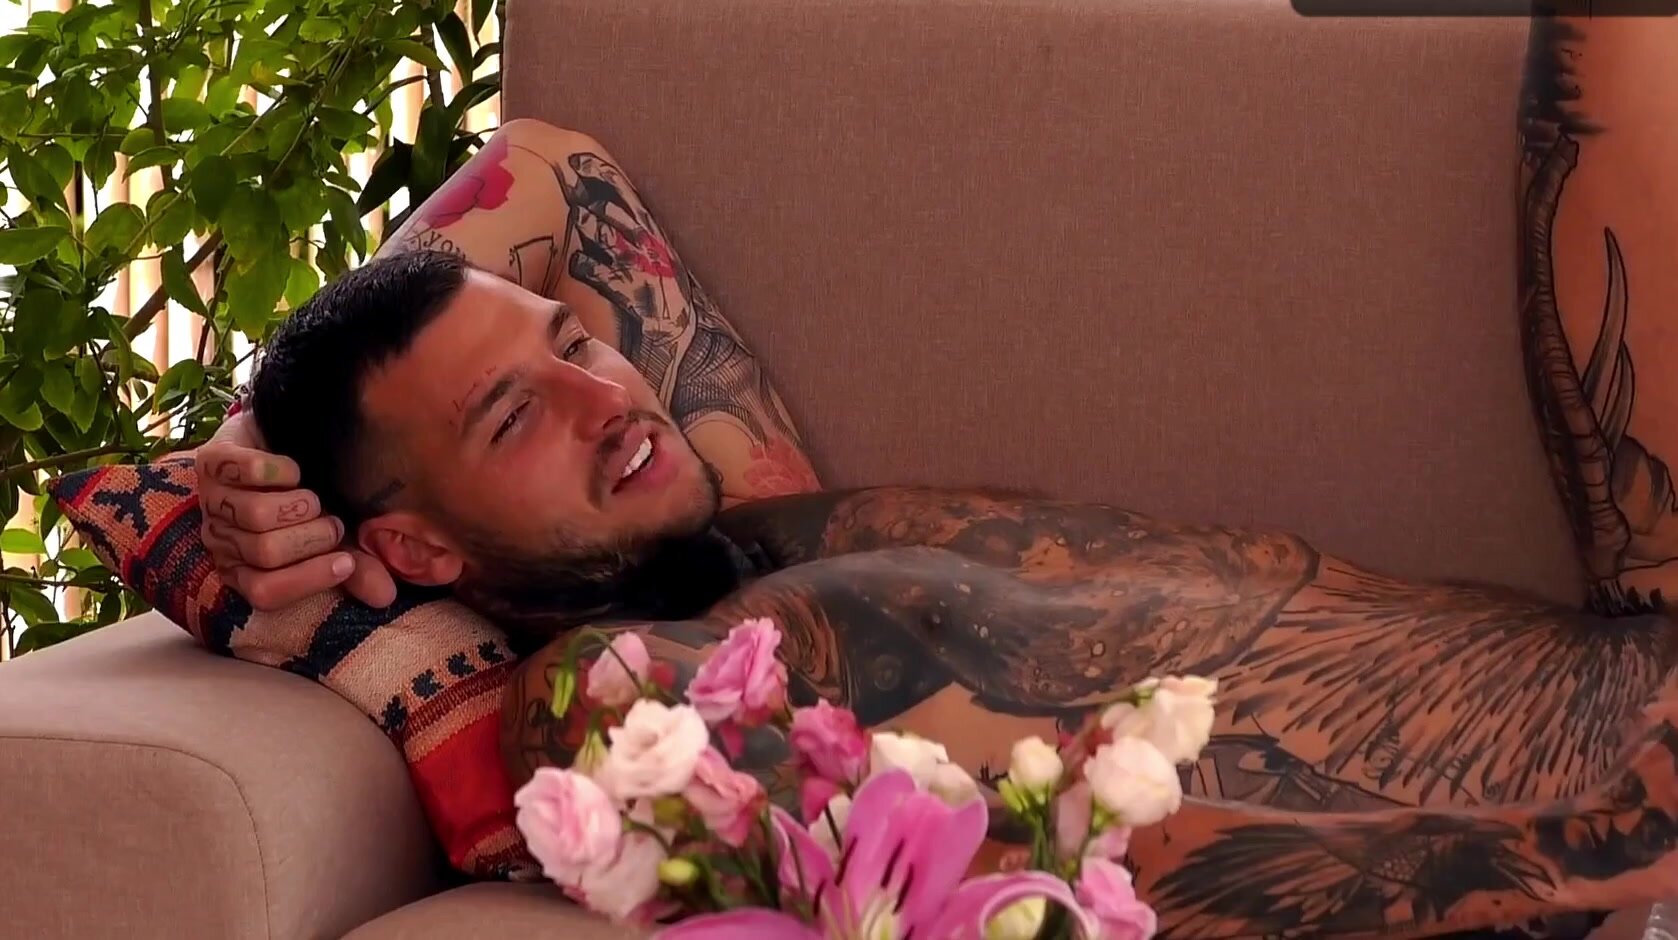 Hot tattooed guy naked in reality show